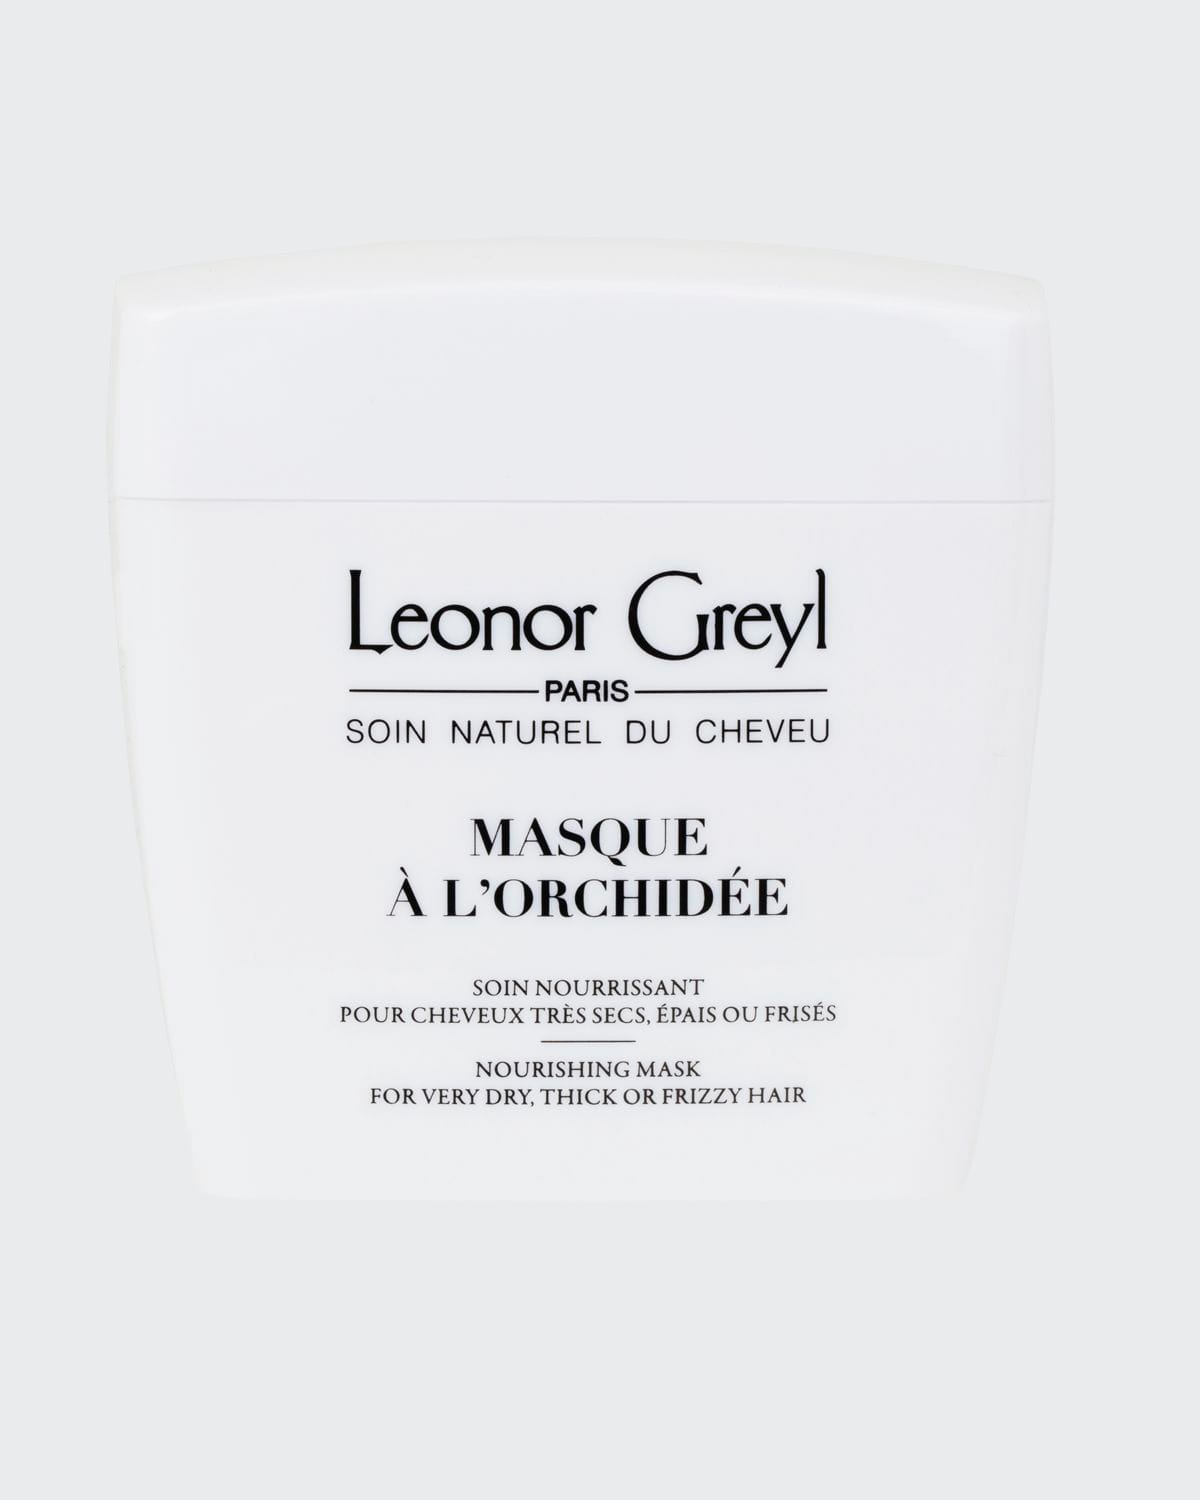 Masque a L'Orchidee (Nourishing Mask for Very Dry, Thick, or Frizzy Hair),7.0 oz./ 200 mL